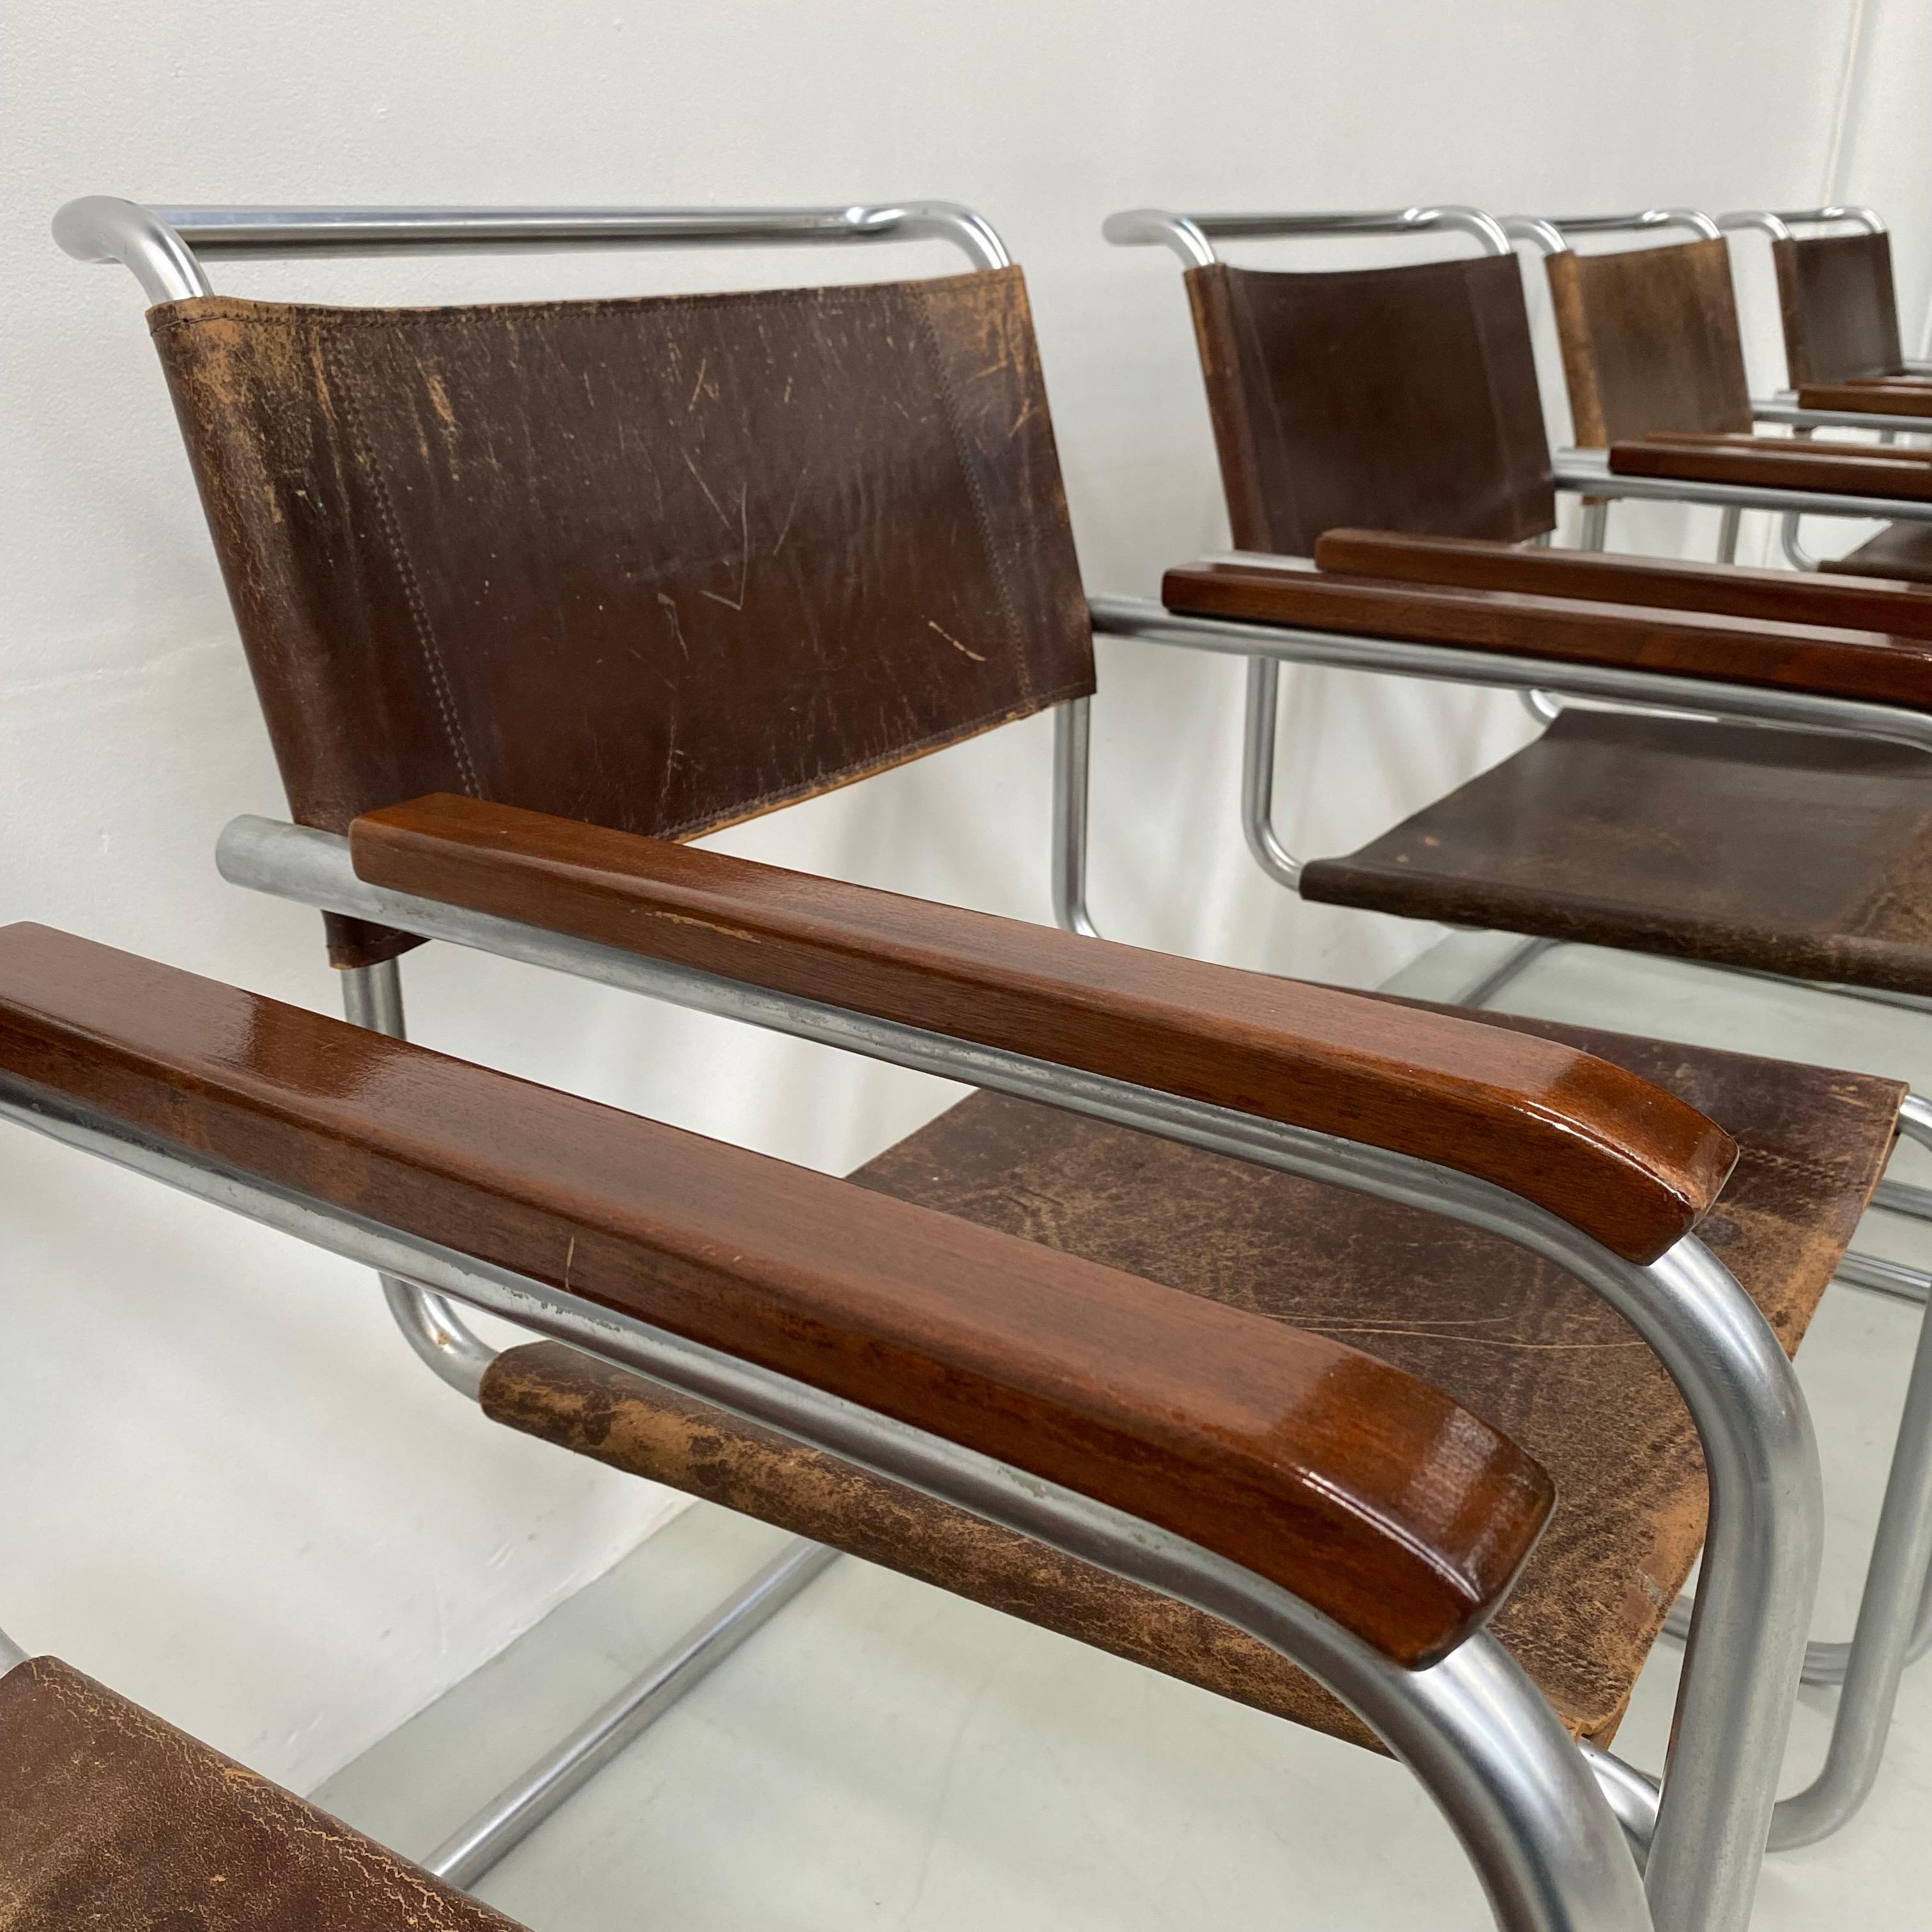 These set of 5, B34 chairs were designed by Marcel Breuer between 1920 and 1949 for Thonet in Germany. The iconic chair features a steel matt chromed tubular frame , 2 wooden armrests and a brown saddle leather backrest and seating with patina. As